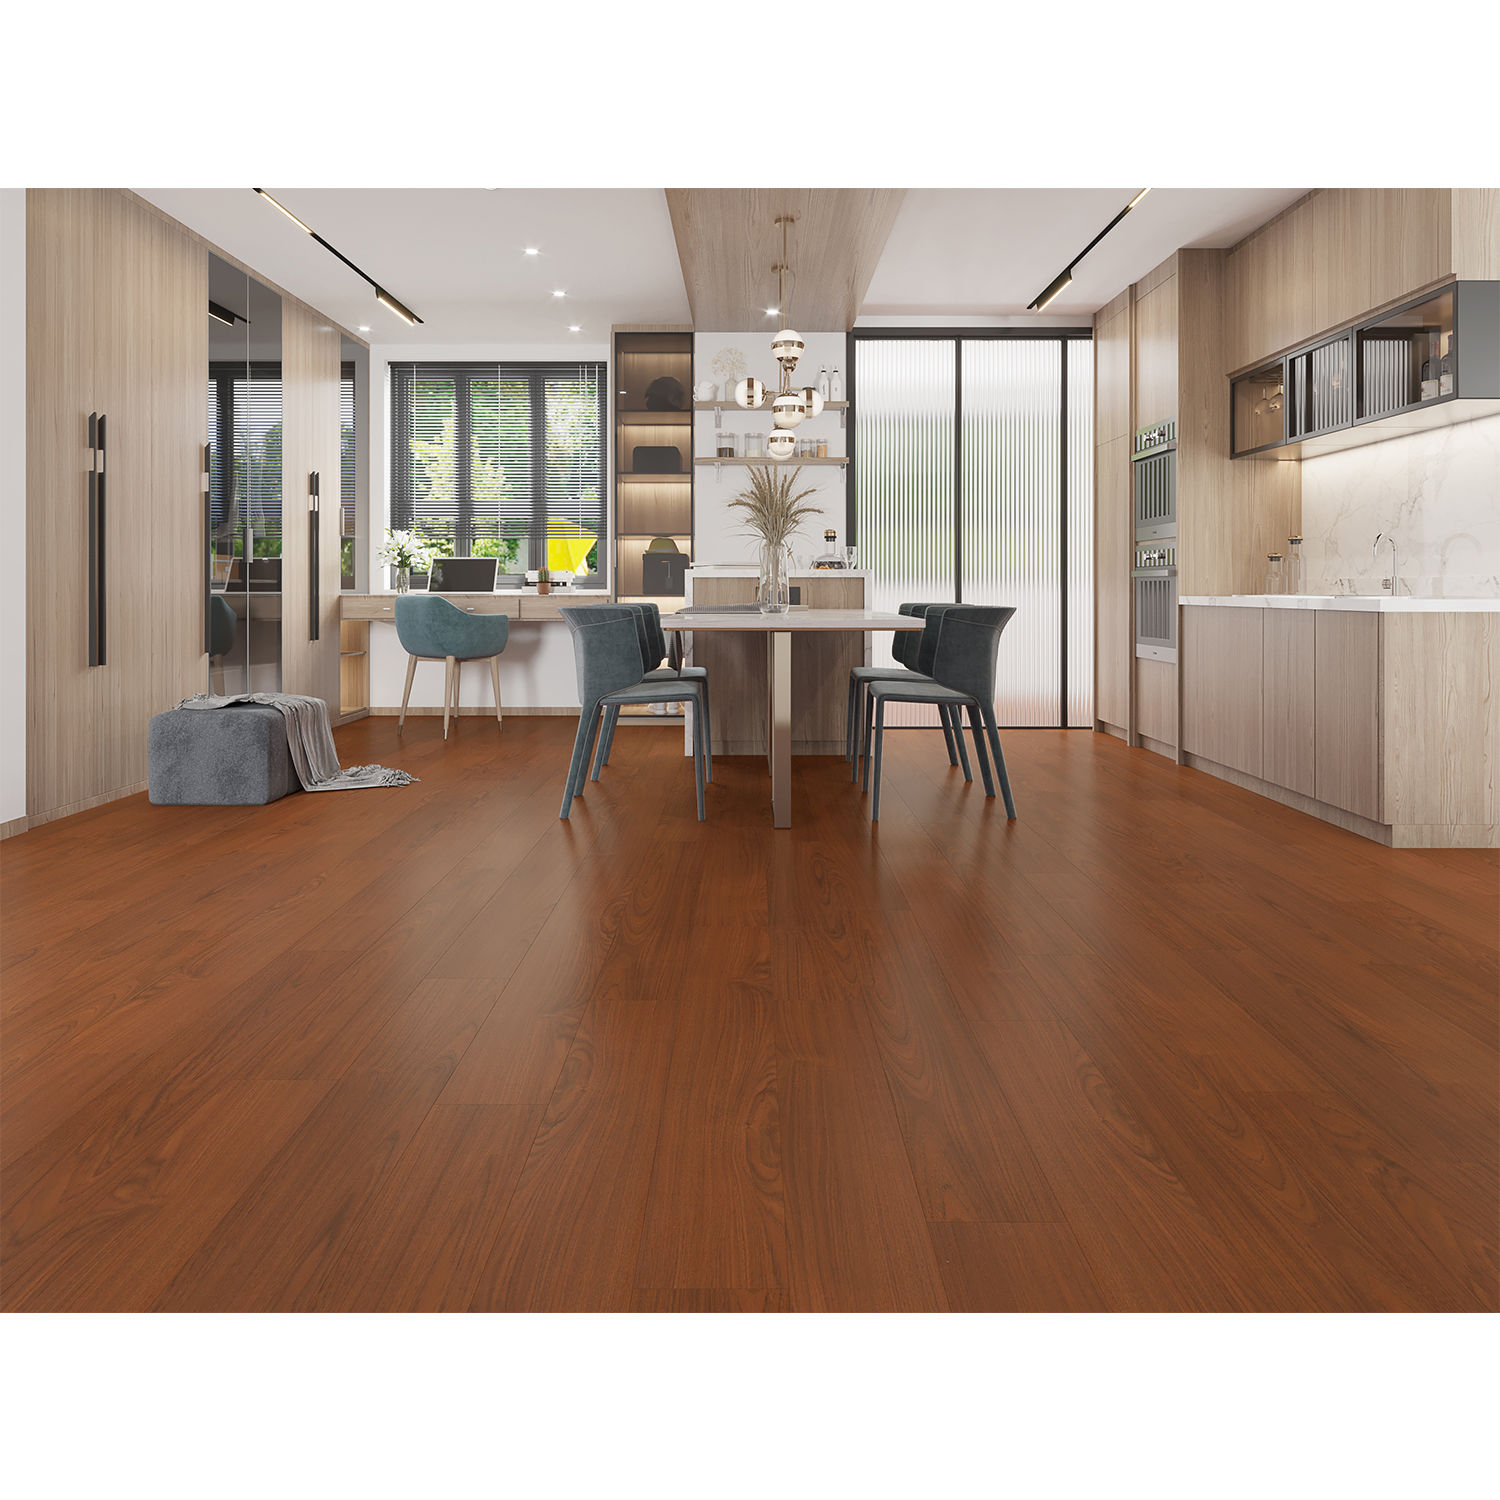 Floorest - 12mm Laminate AC4 - 7 1/2 Embossed Finish - E708 - Ruby Rich - 20.56 SF / Box